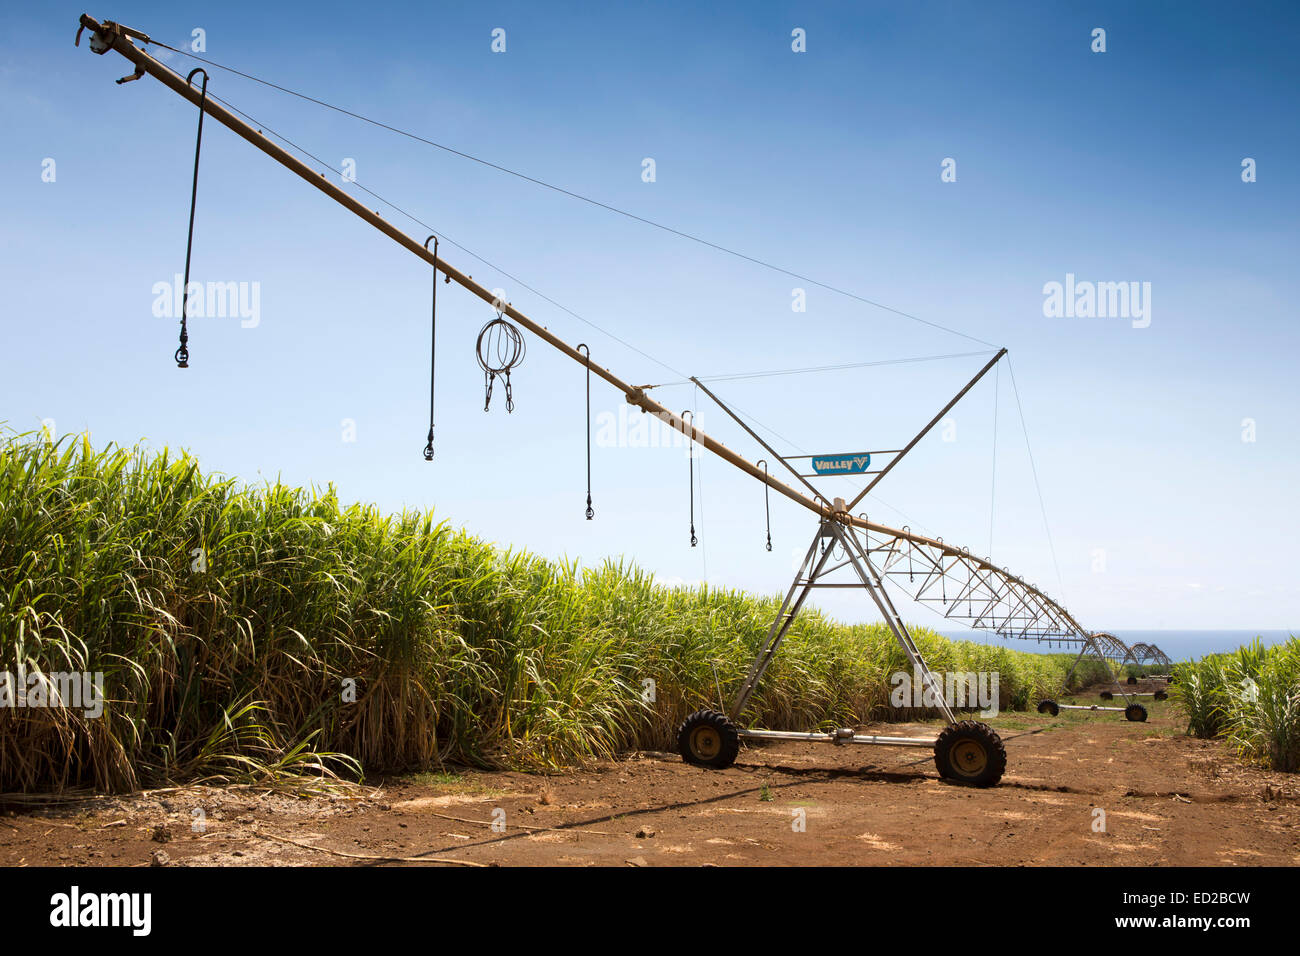 Mauritius, Albion, agriculture, Valley linear crop irrigation machine in sugar cane fields Stock Photo